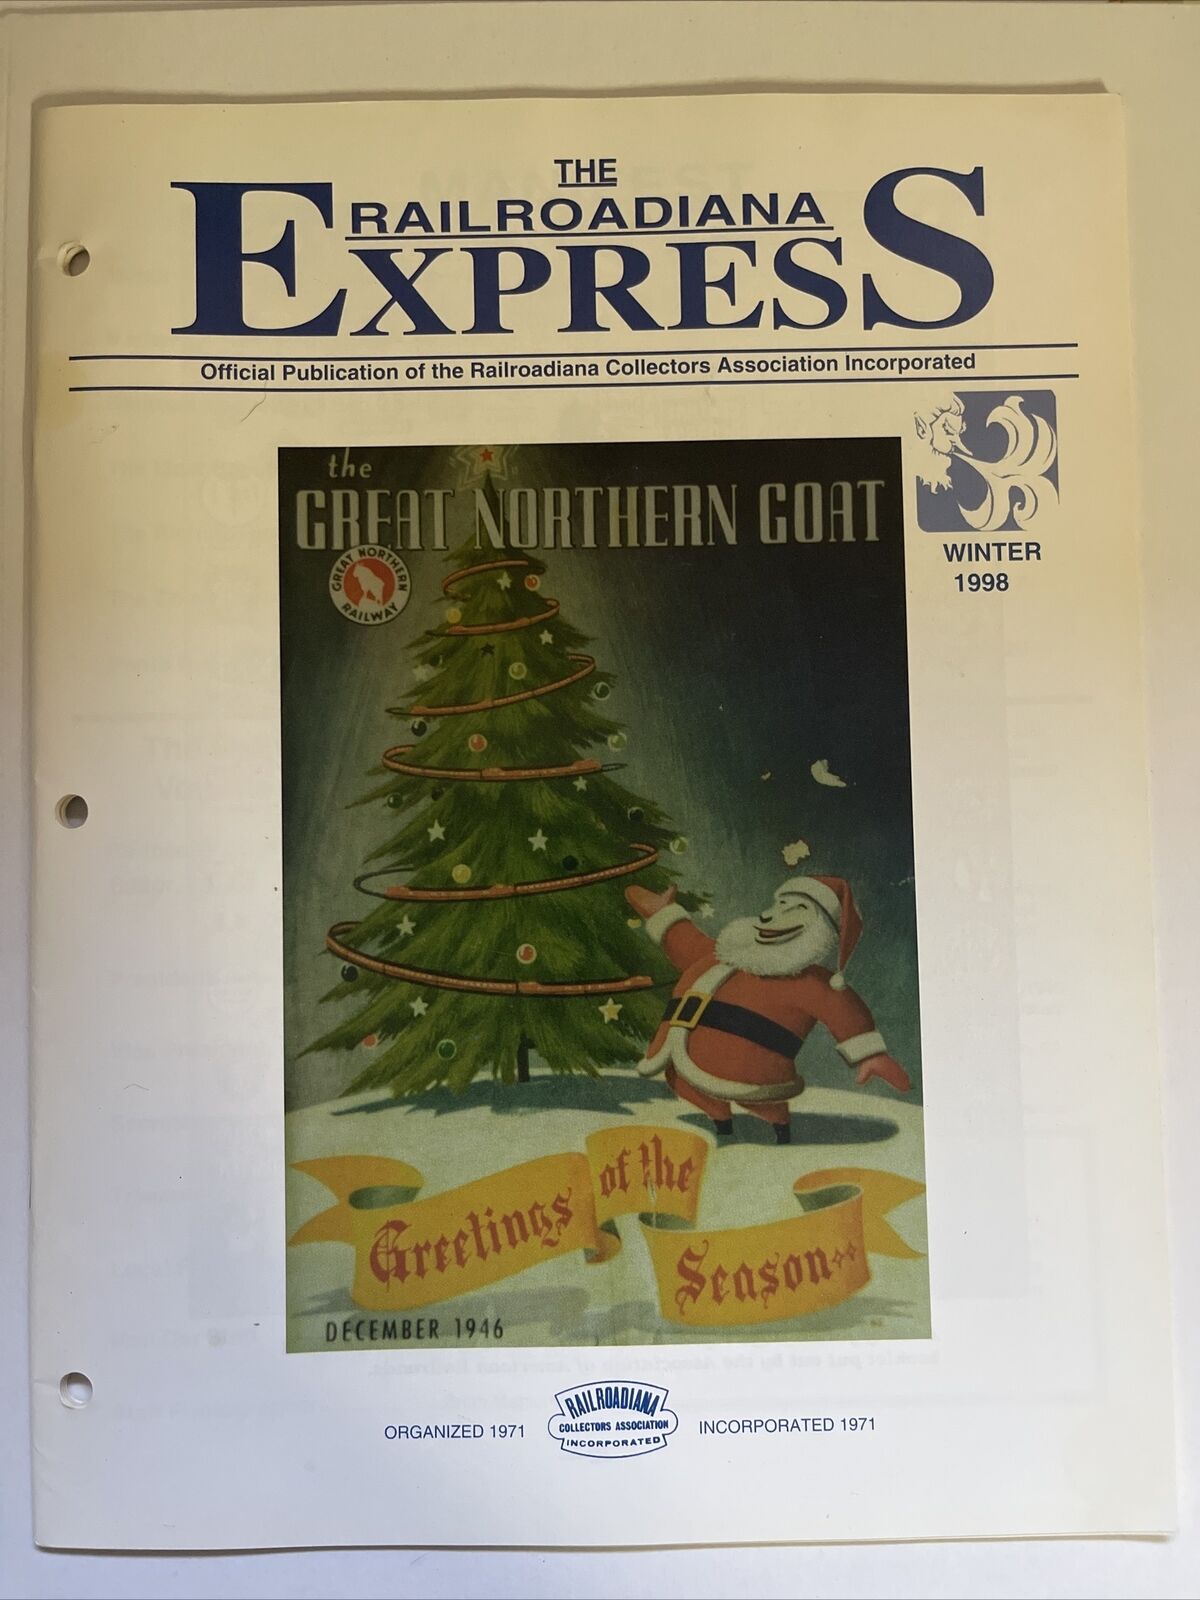 The Railroadiana Express Winter 1998 Official Publication 31 pg glossy Magazine